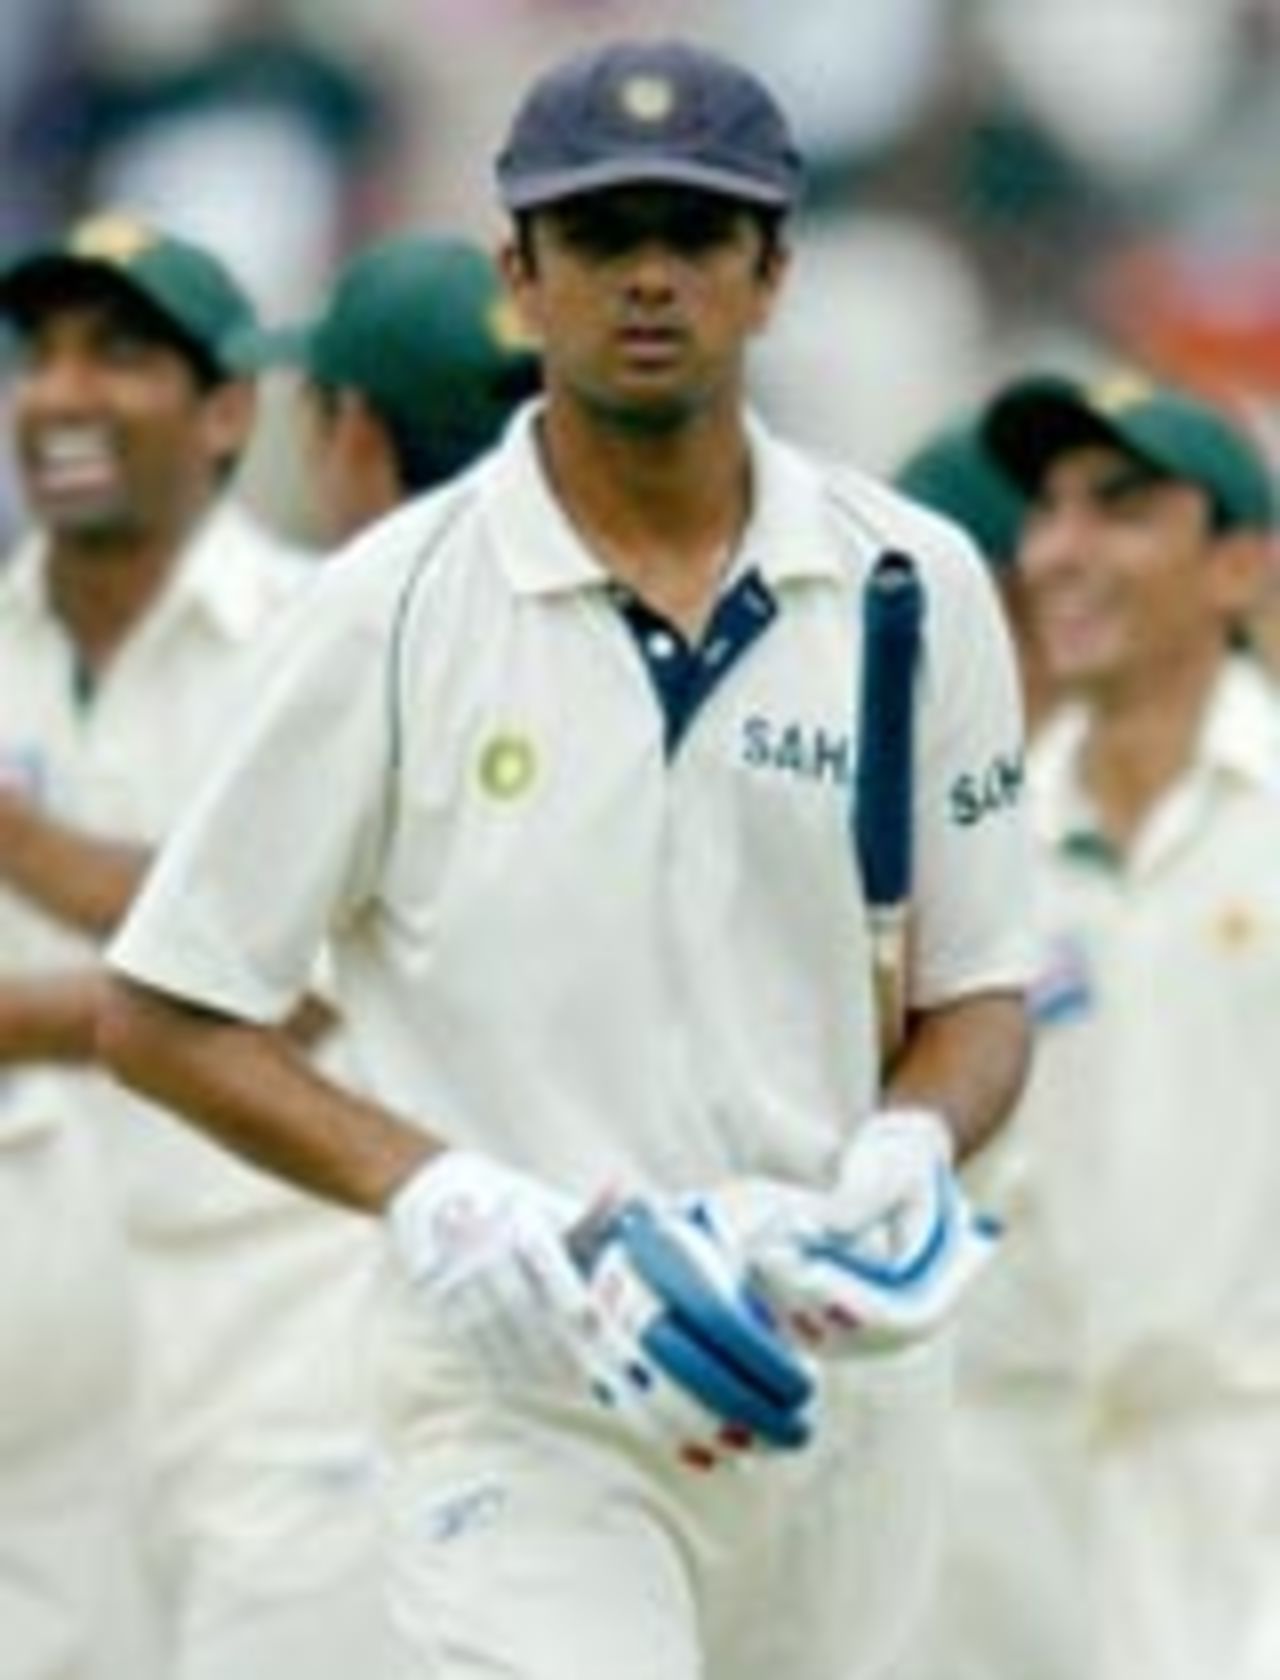 Rahul Dravid trudges back after being dismissed, India v Pakistan, 3rd Test, Bangalore, 5th day, March 28, 2005